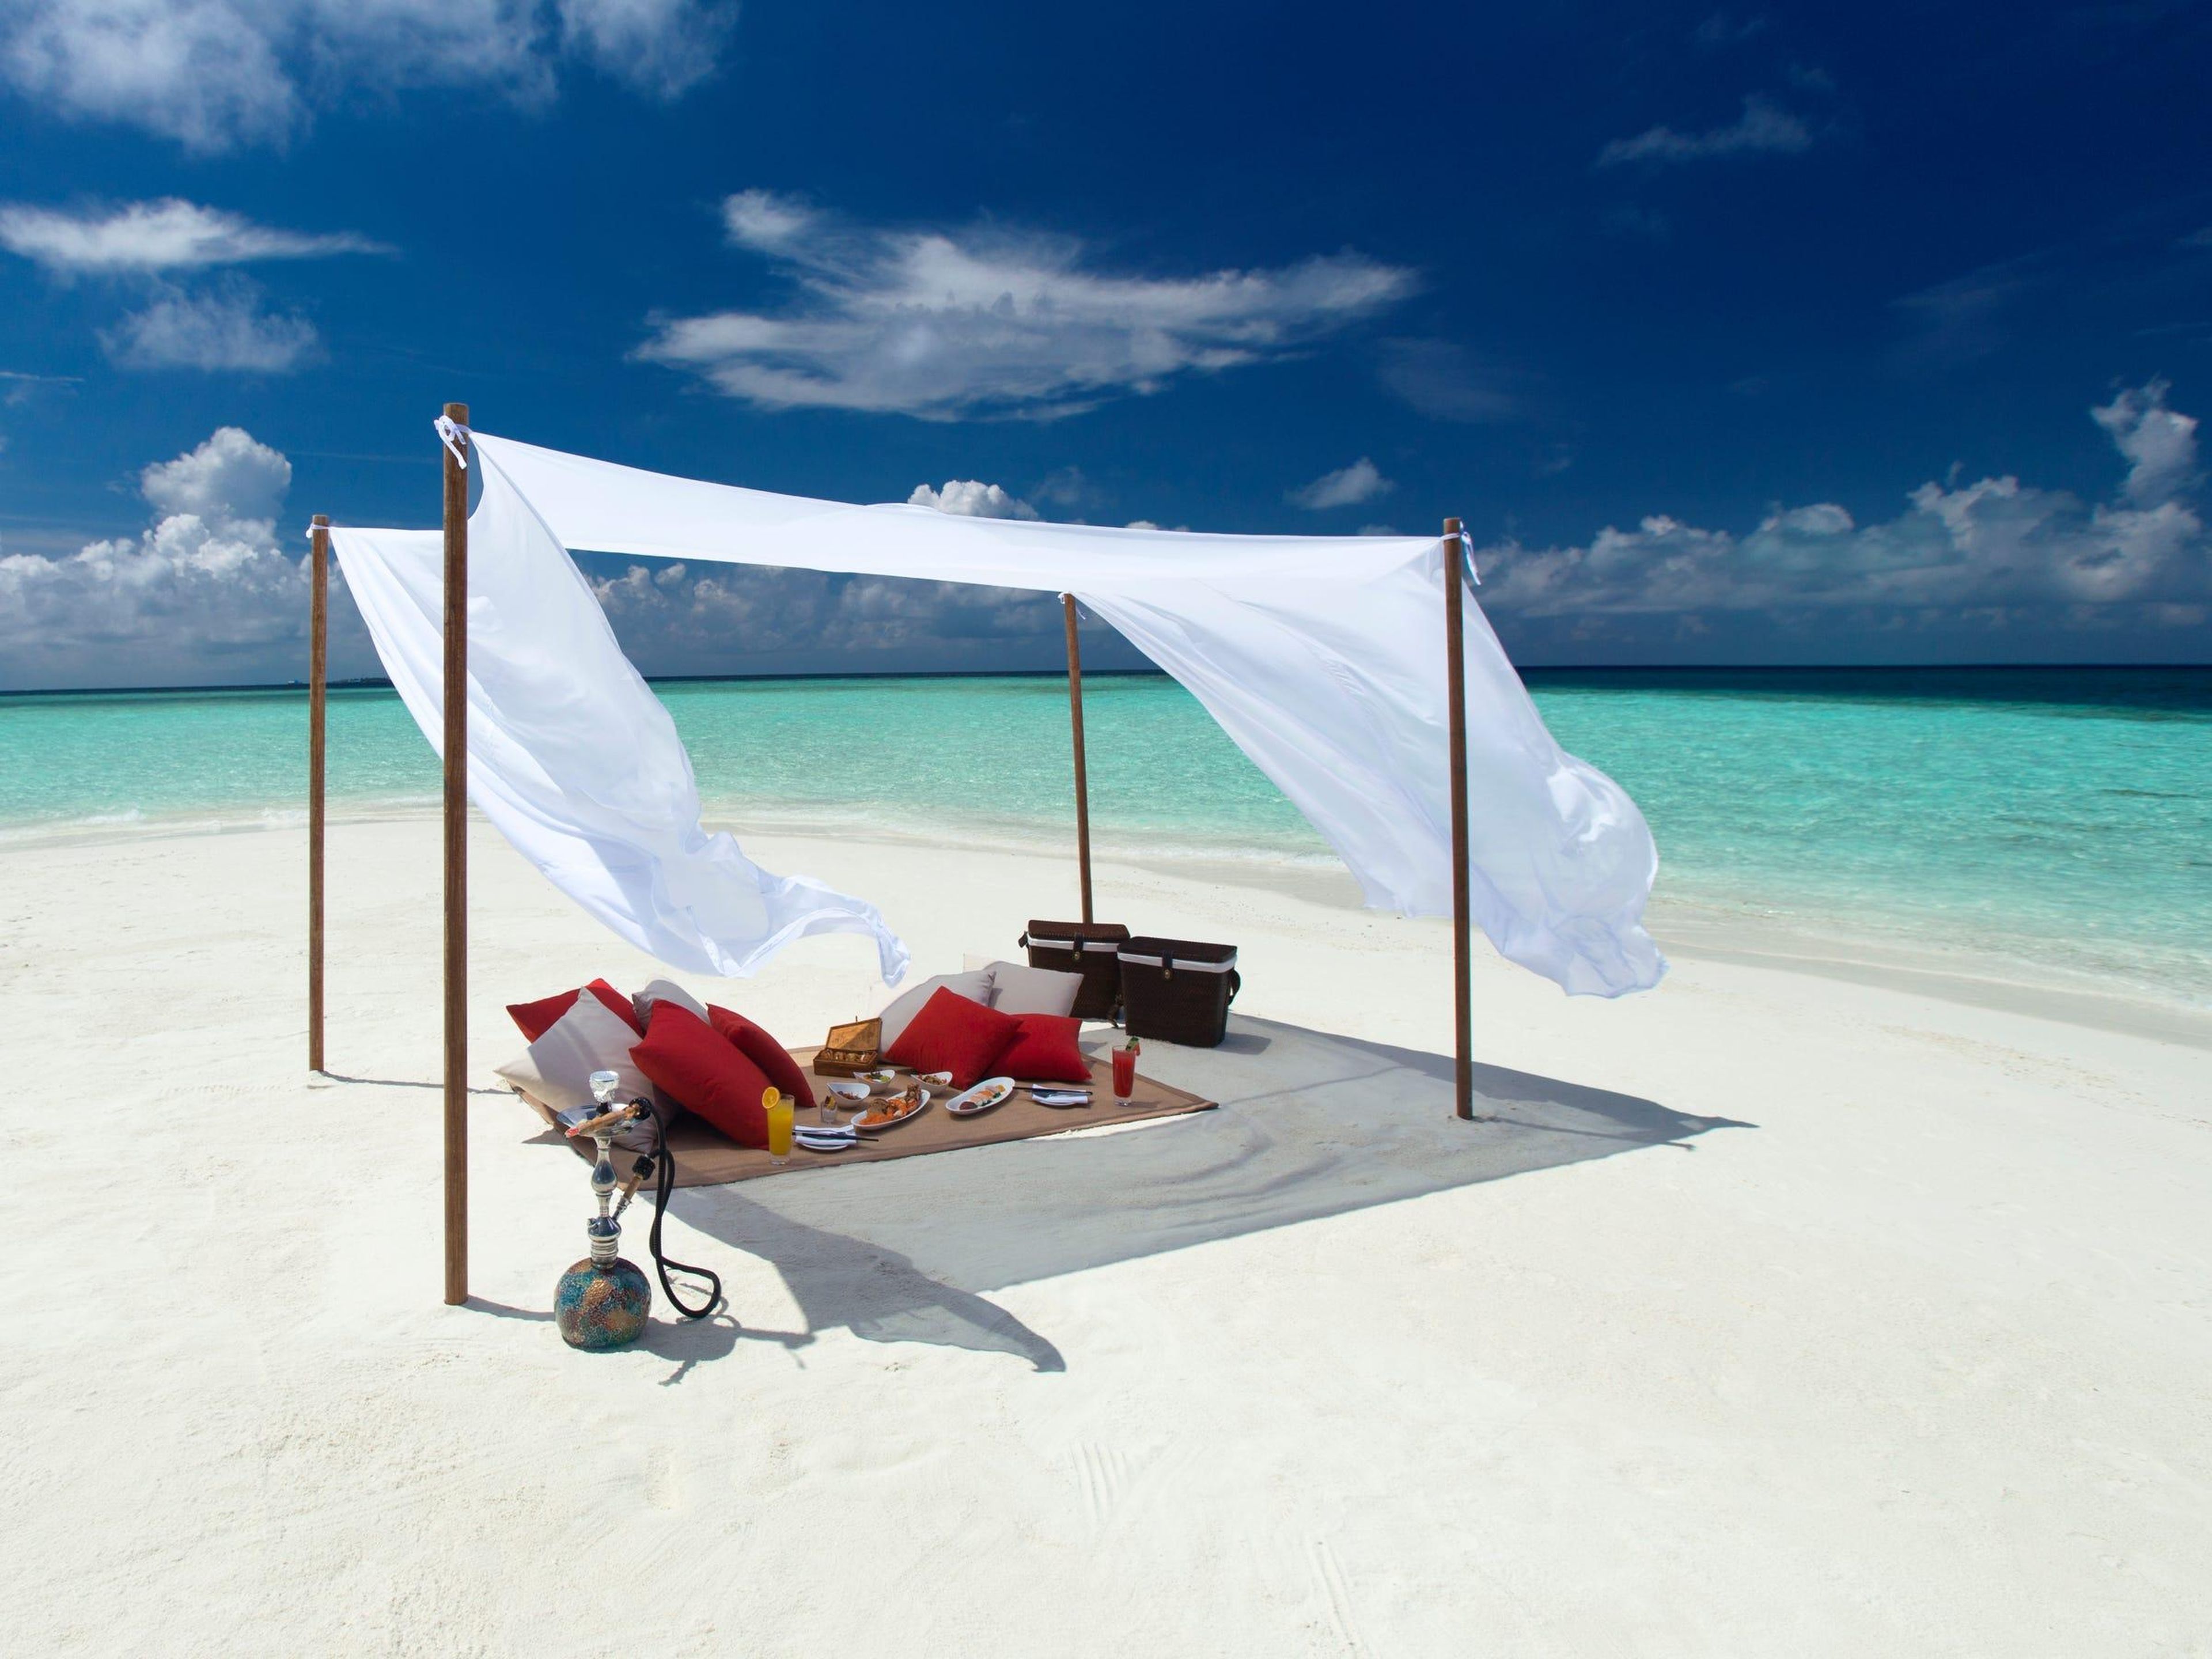 And if the restaurant options aren't enough, guests can also opt for a secluded beach picnic.